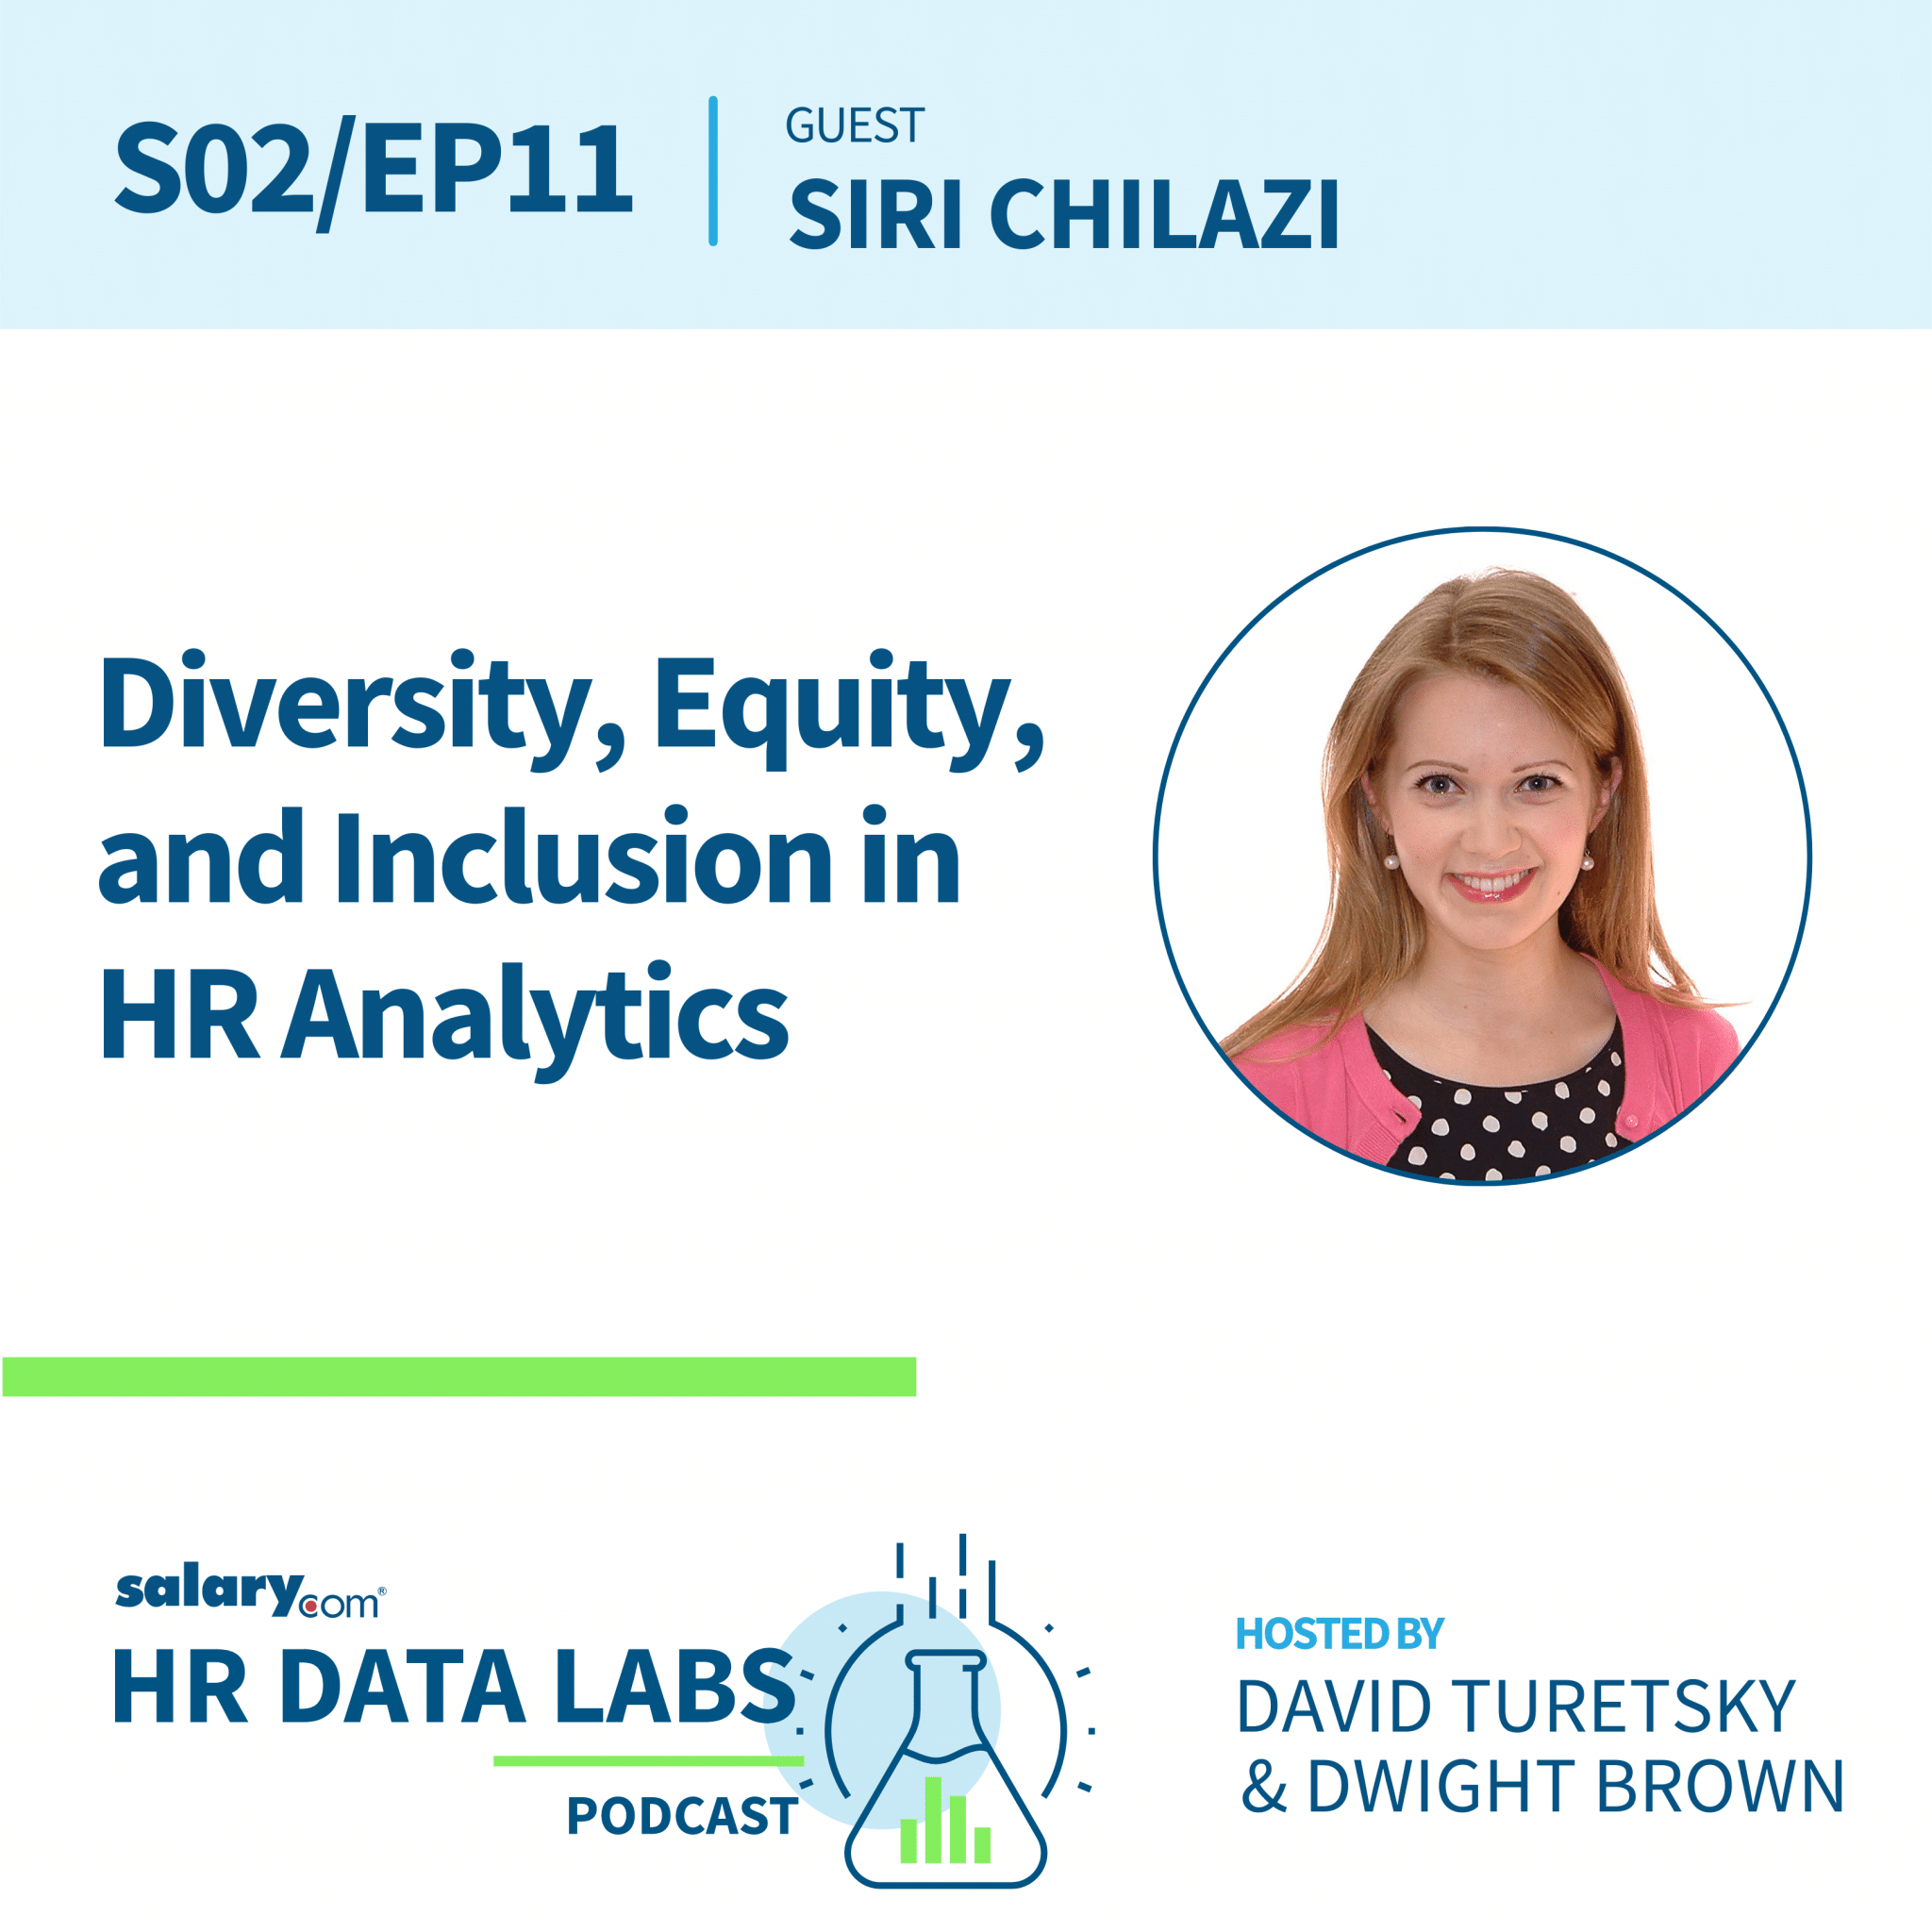 Diversity, Equity, and Inclusion in HR Analytics